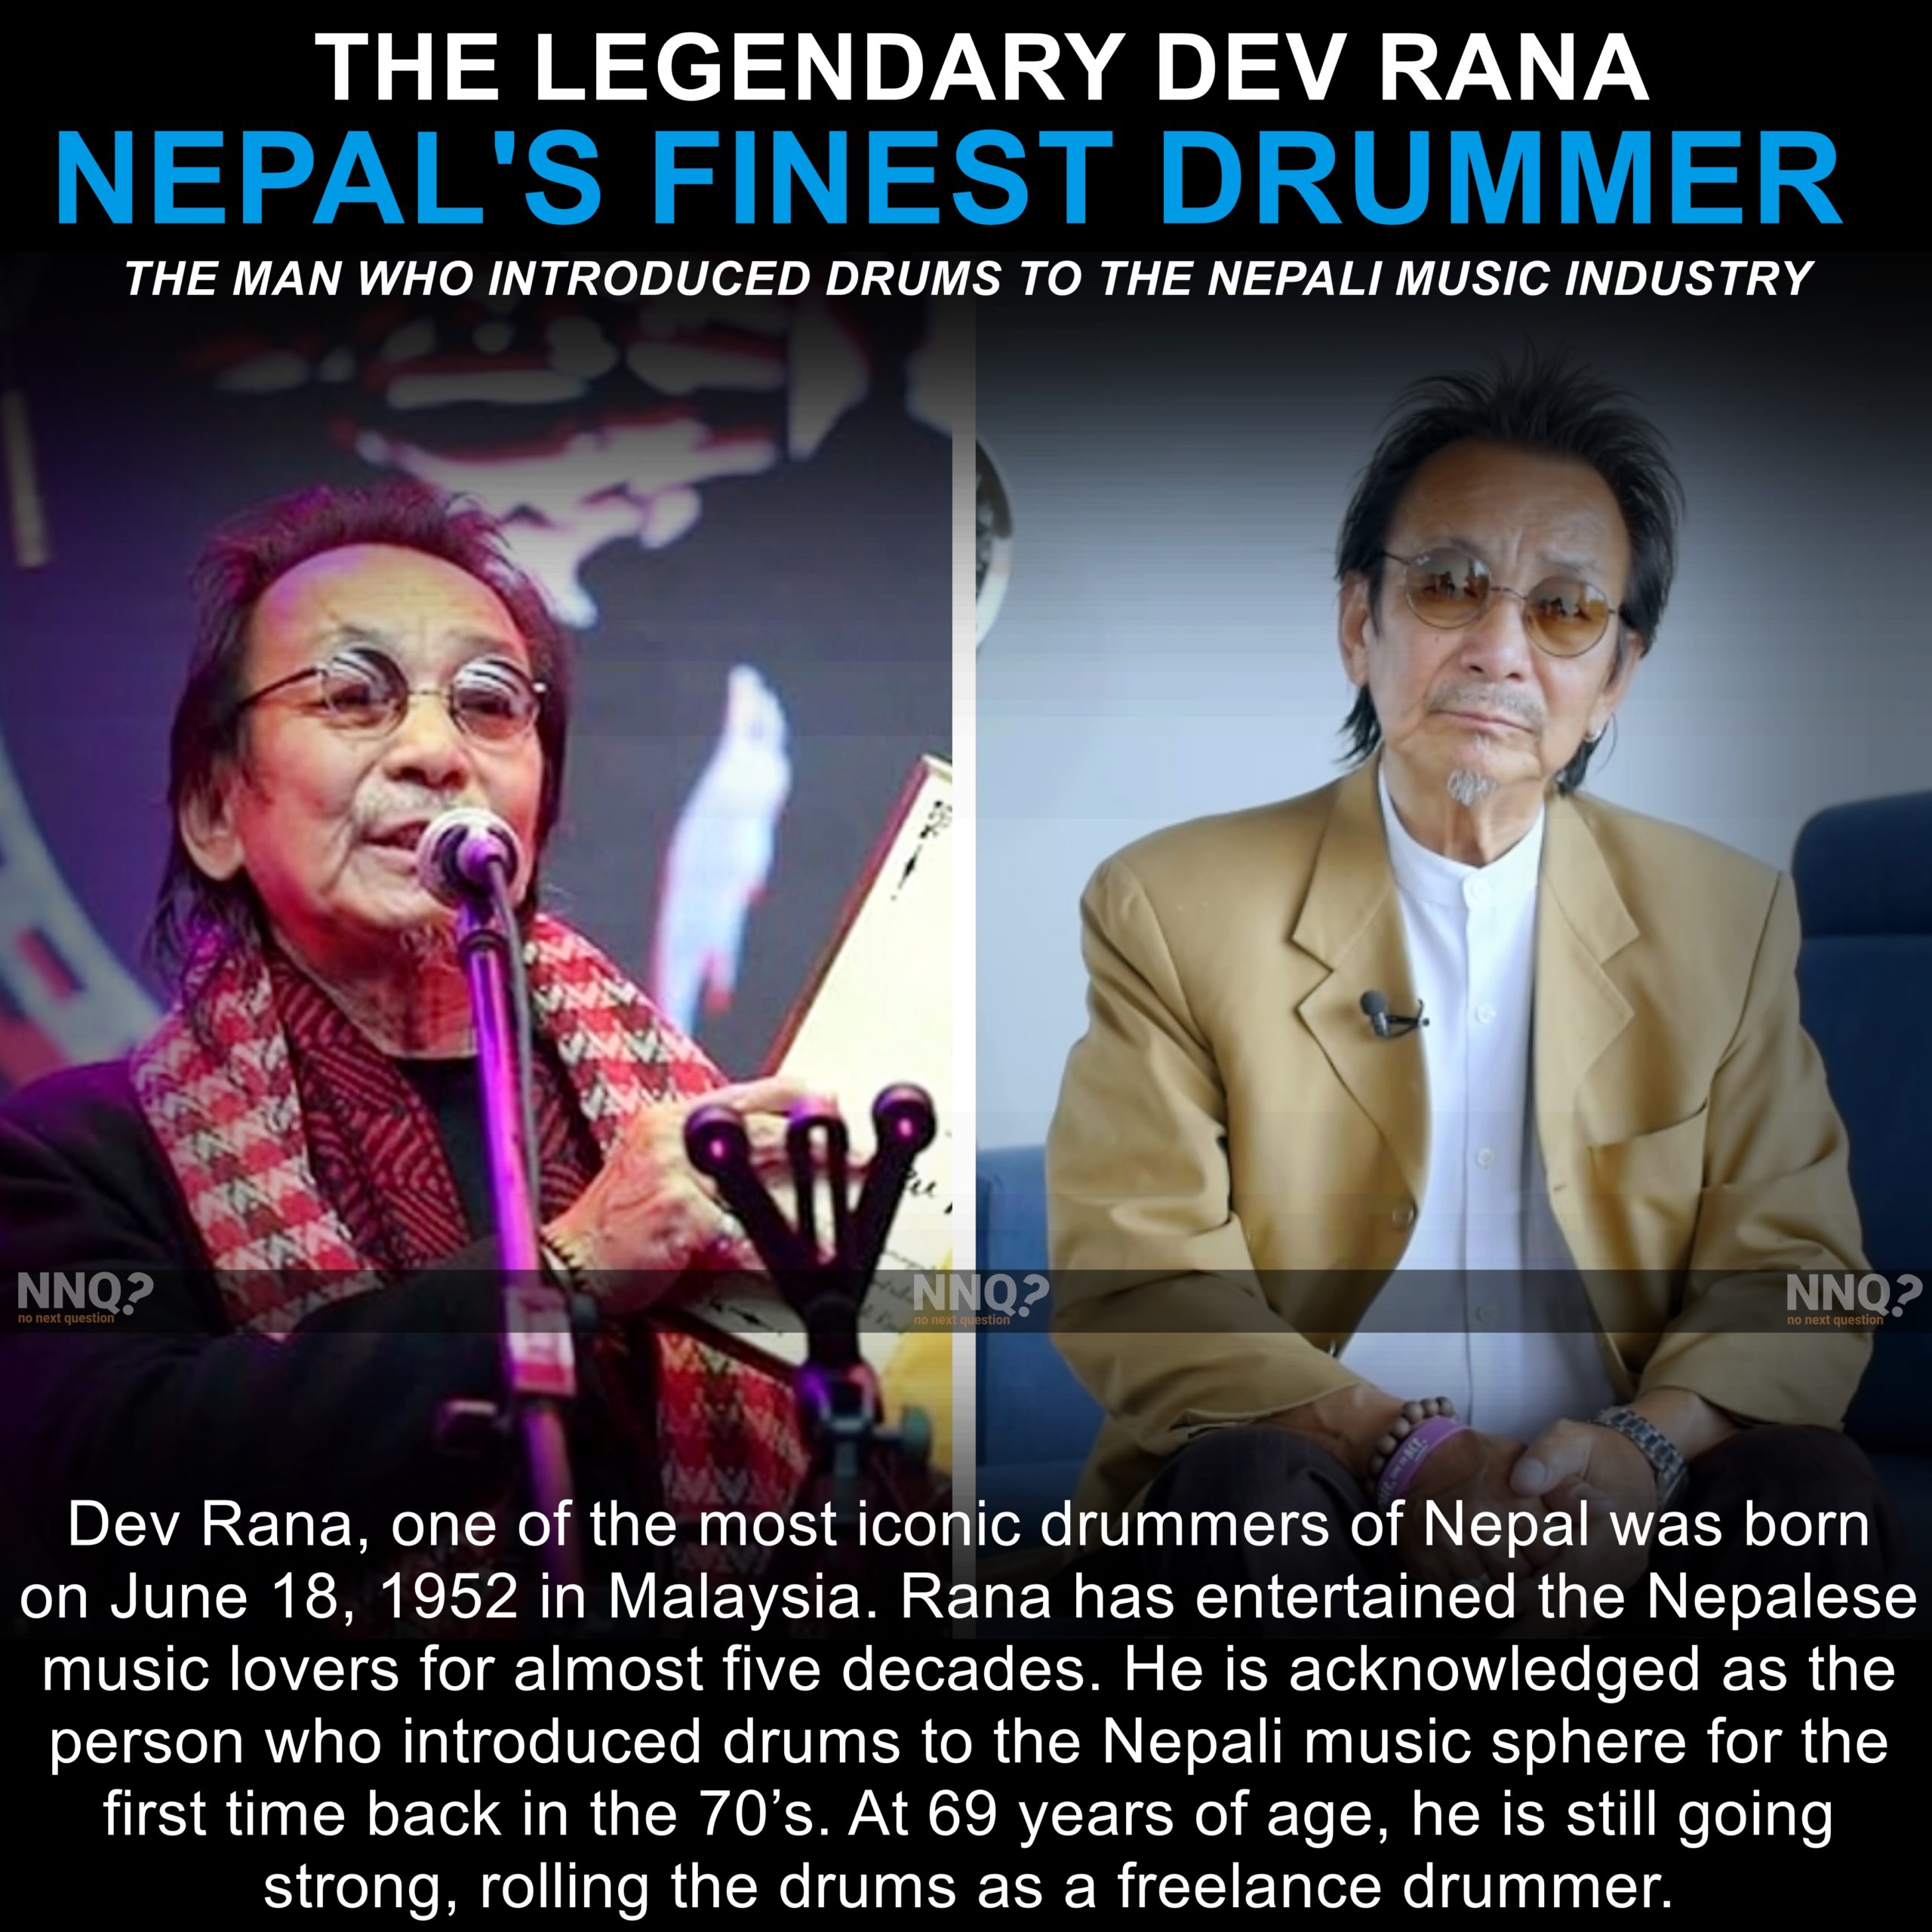 Dev Rana – The Man who introduced Drums to Nepali Music Industry.